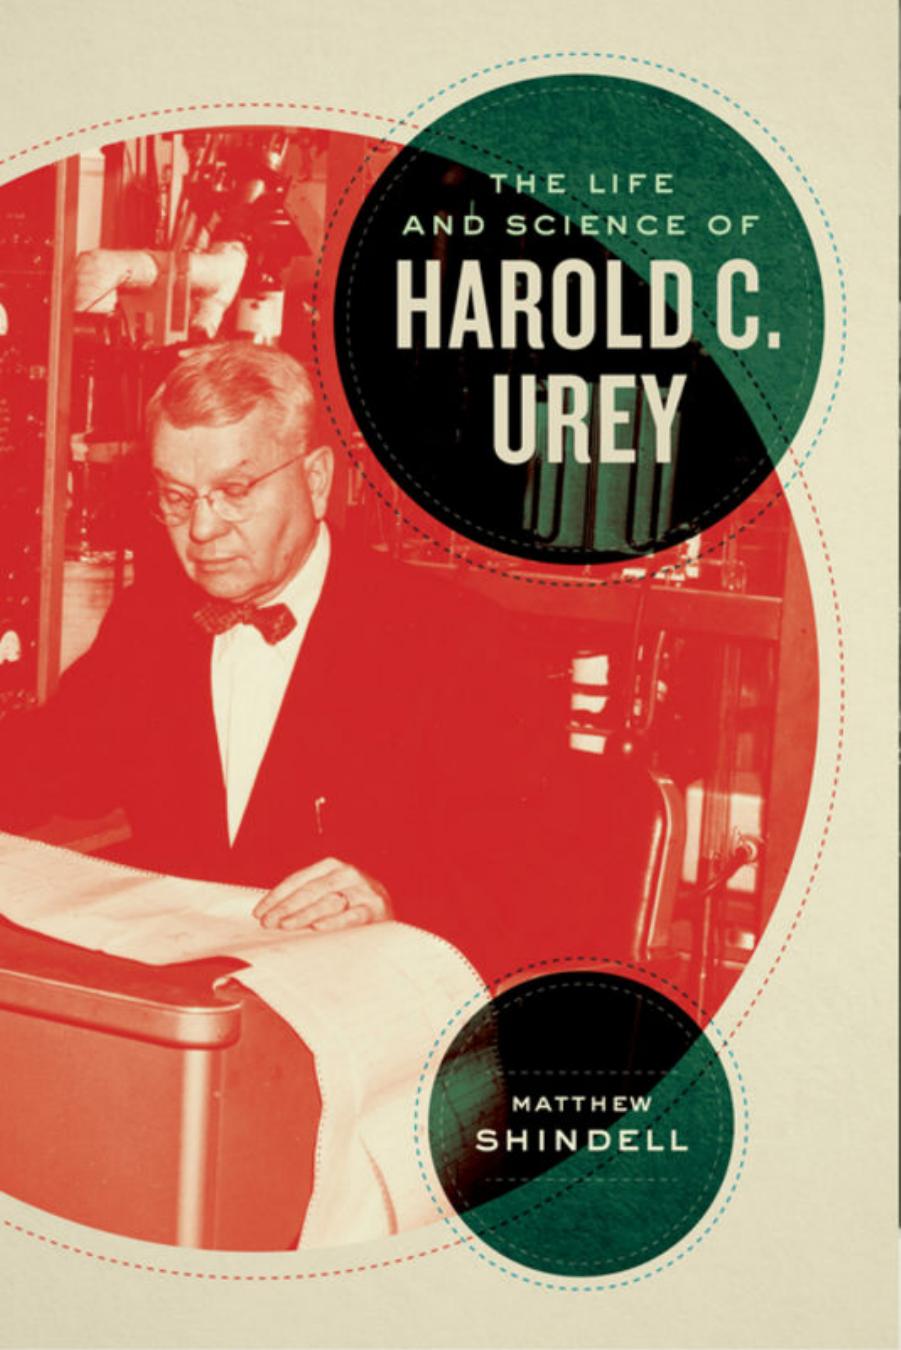 The Life and Science of Harold C. Urey (Matthew Shindell)9780226662114